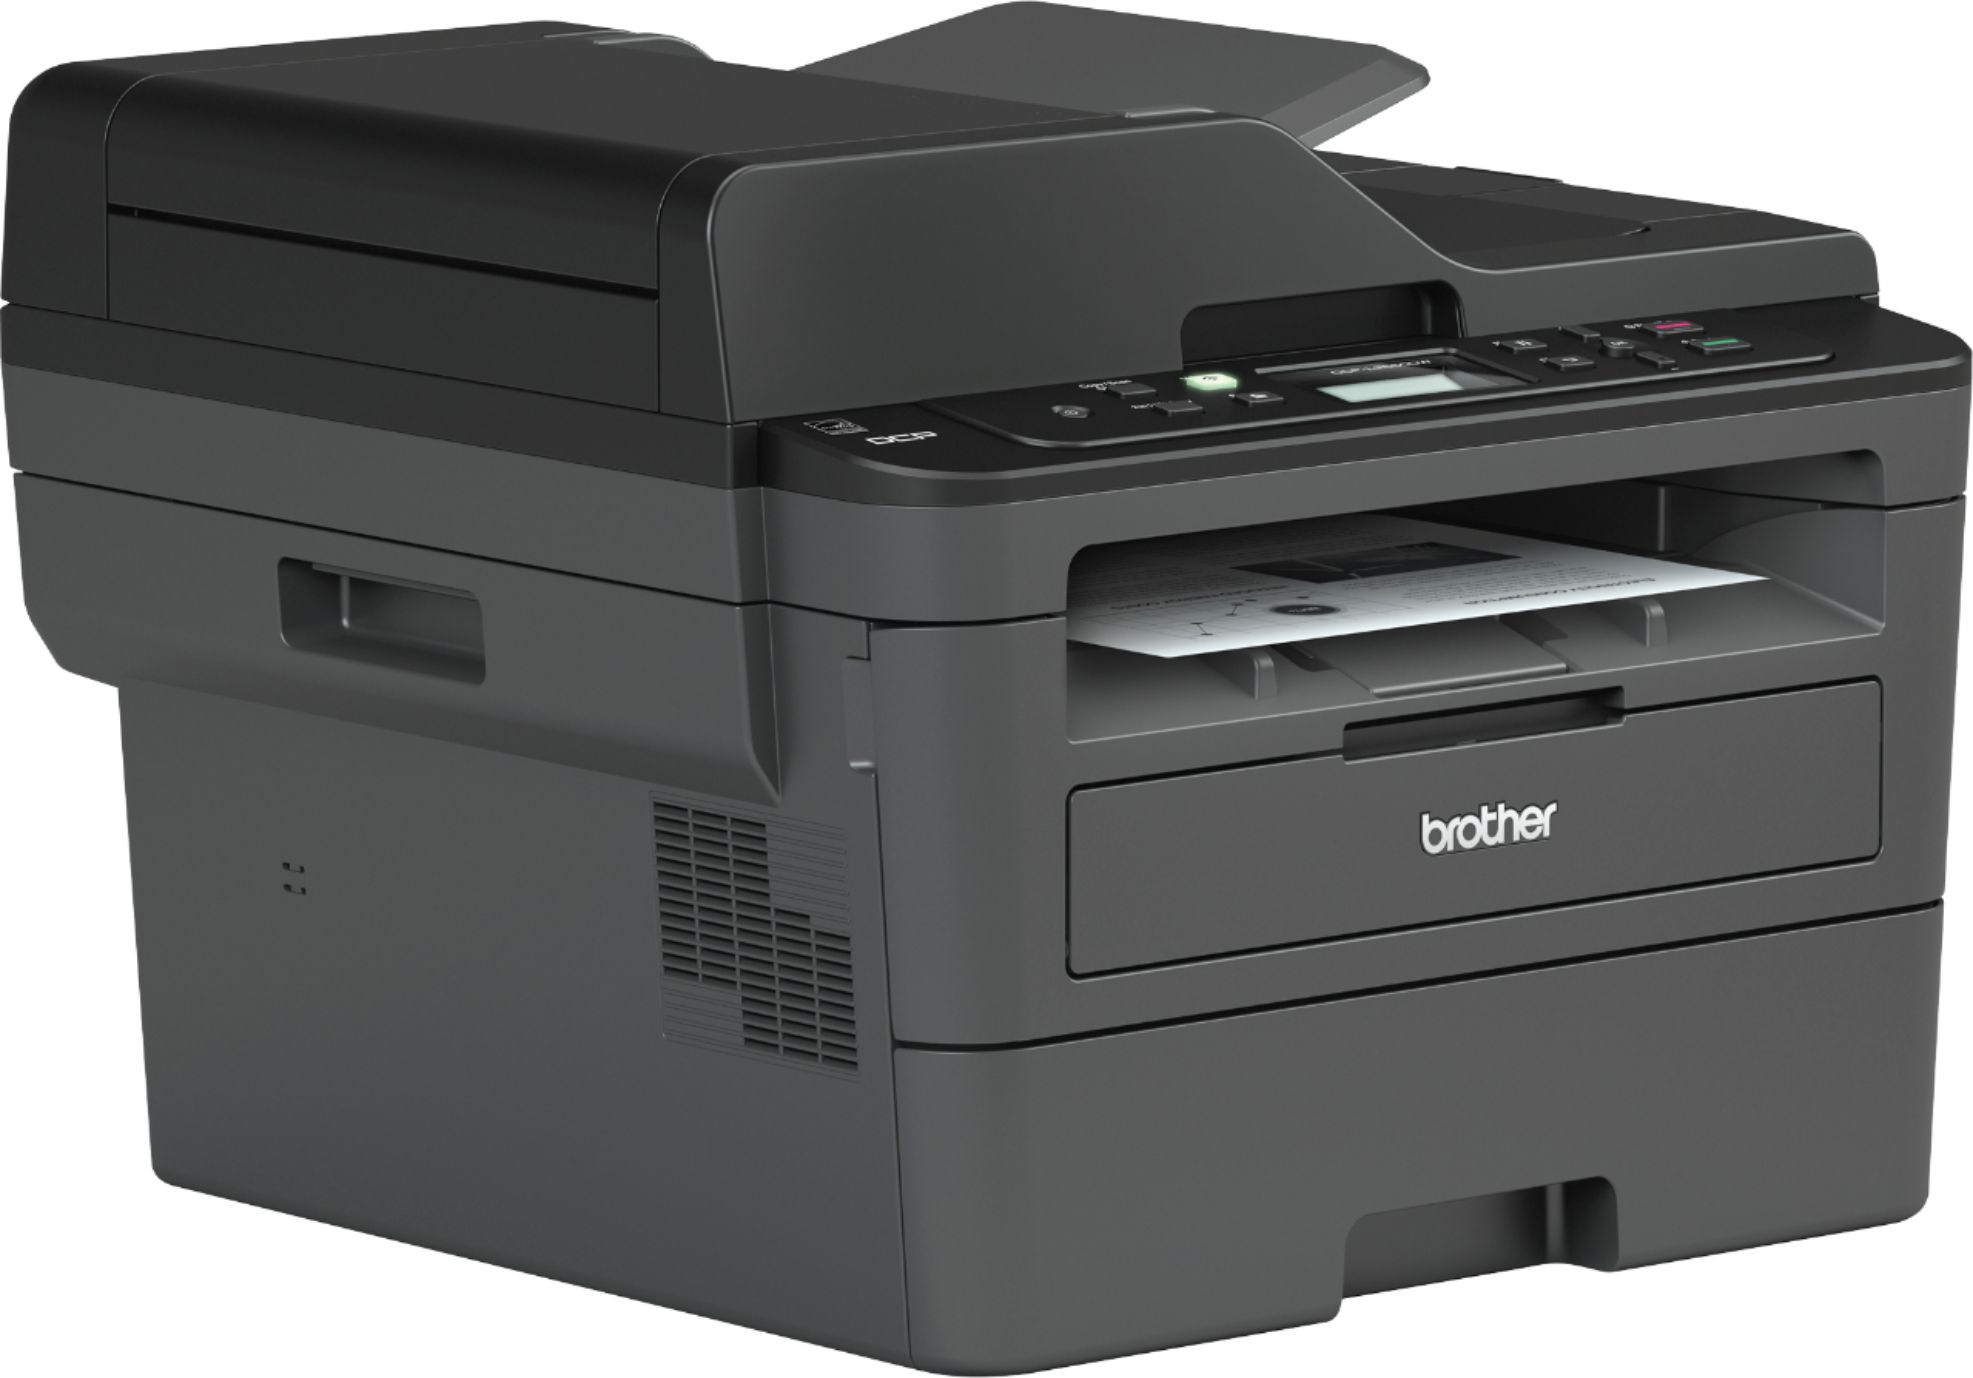 Angle View: Canon - imageCLASS MF236n Black-and-White All-In-One Laser Printer - Black